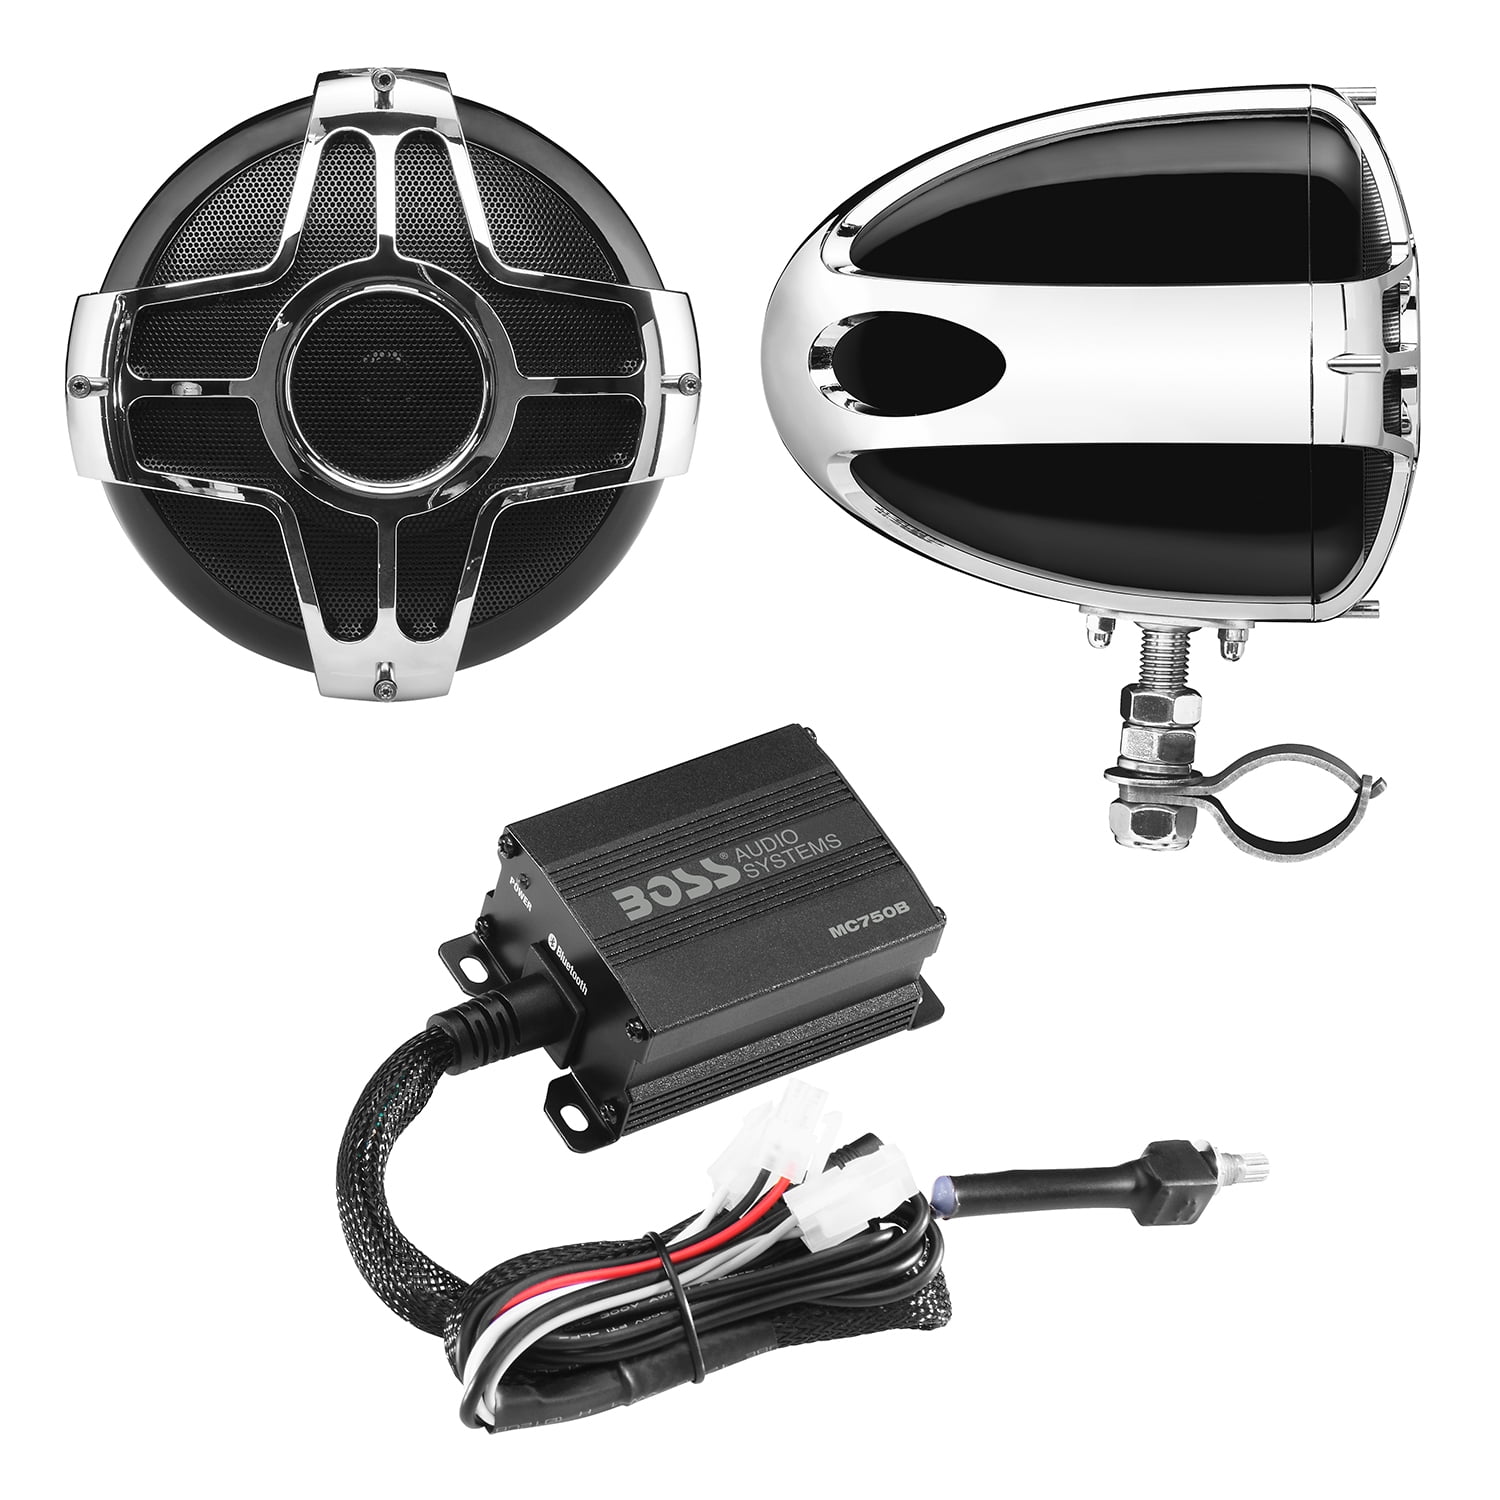 Boss MC750B Bluetooth 1000 Watts Motorcycle Speaker and Amplifier System New